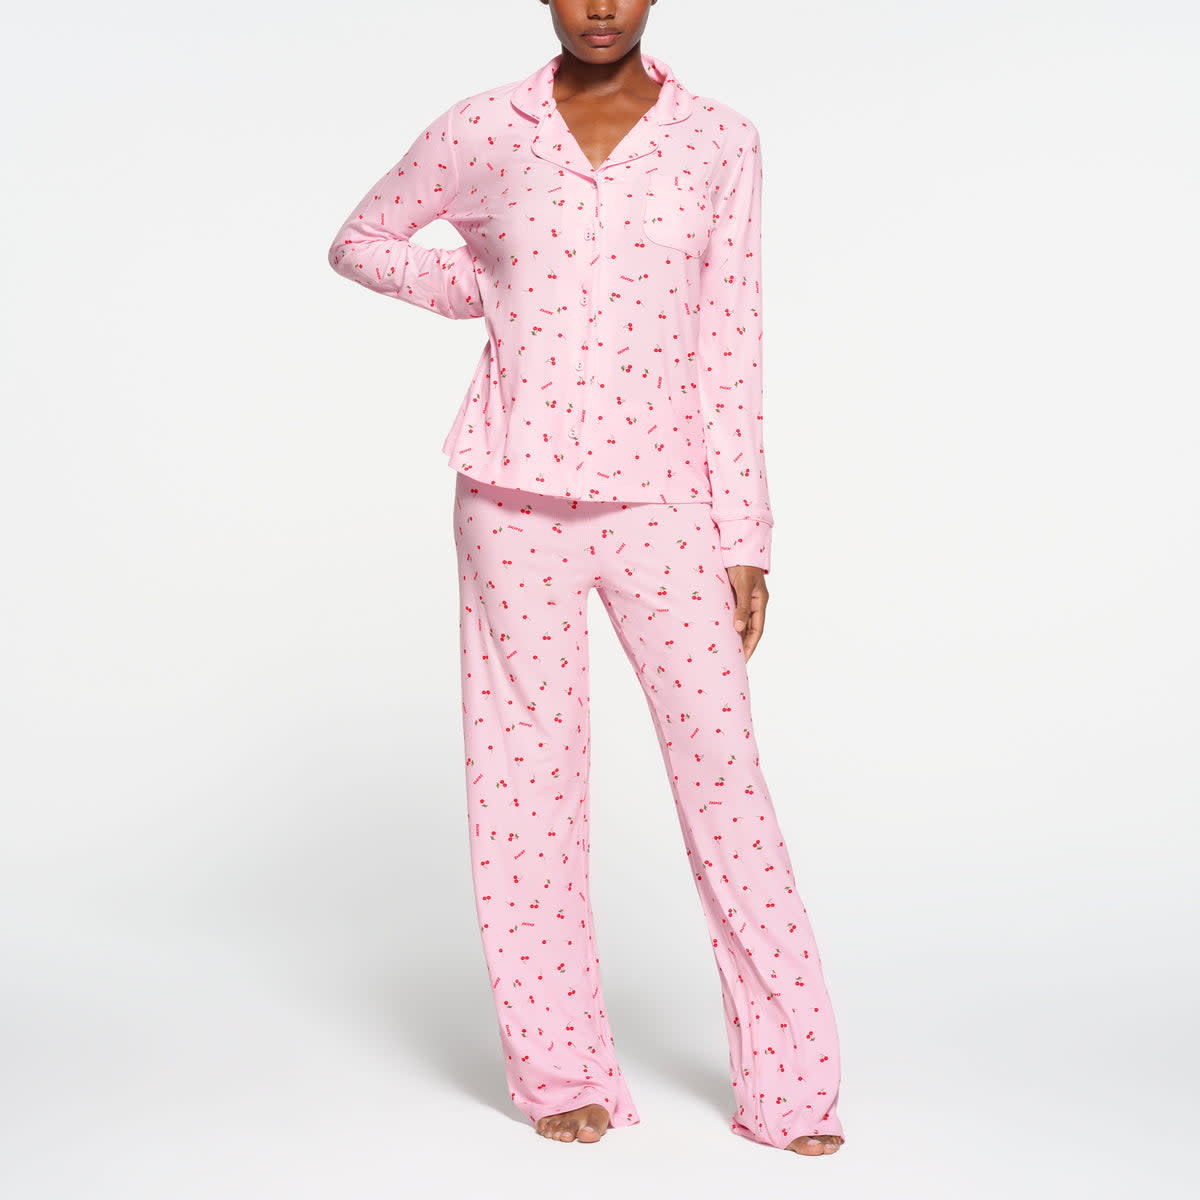 Just got my new Victoria Secret Modal pajamas in the mail! My